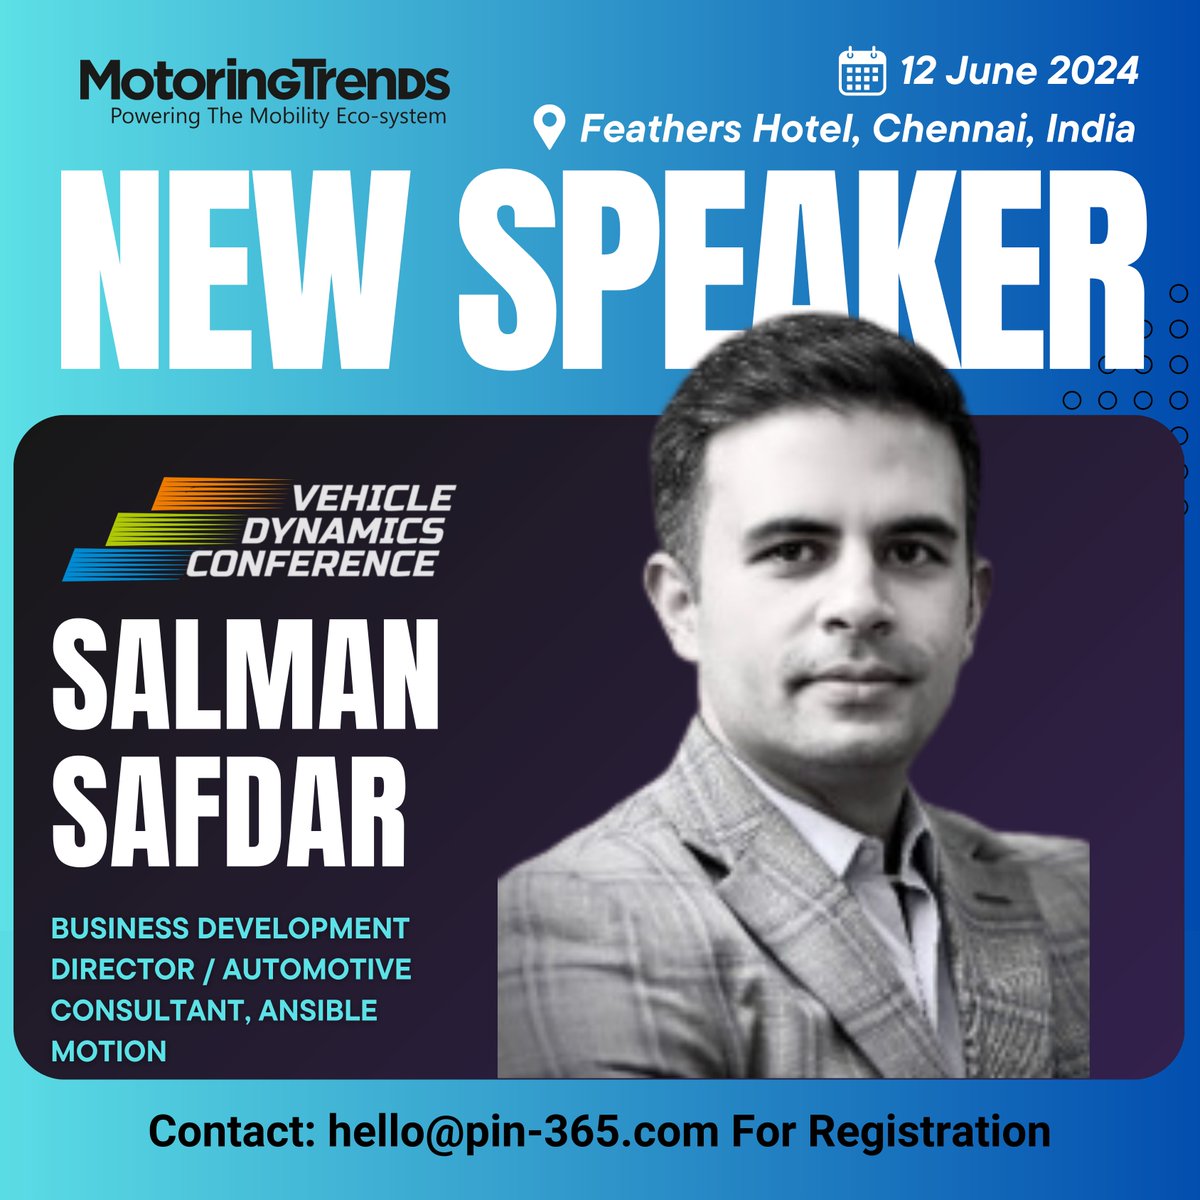 Joining us is Salman Safdar Business Development Director / Automotive Consultant, Ansible Motion who will be sharing invaluable insights on the latest developments in the industry. 

To register and for more details contact: hello@pin-365.com

#VDC #IndustryInsights #Automotive